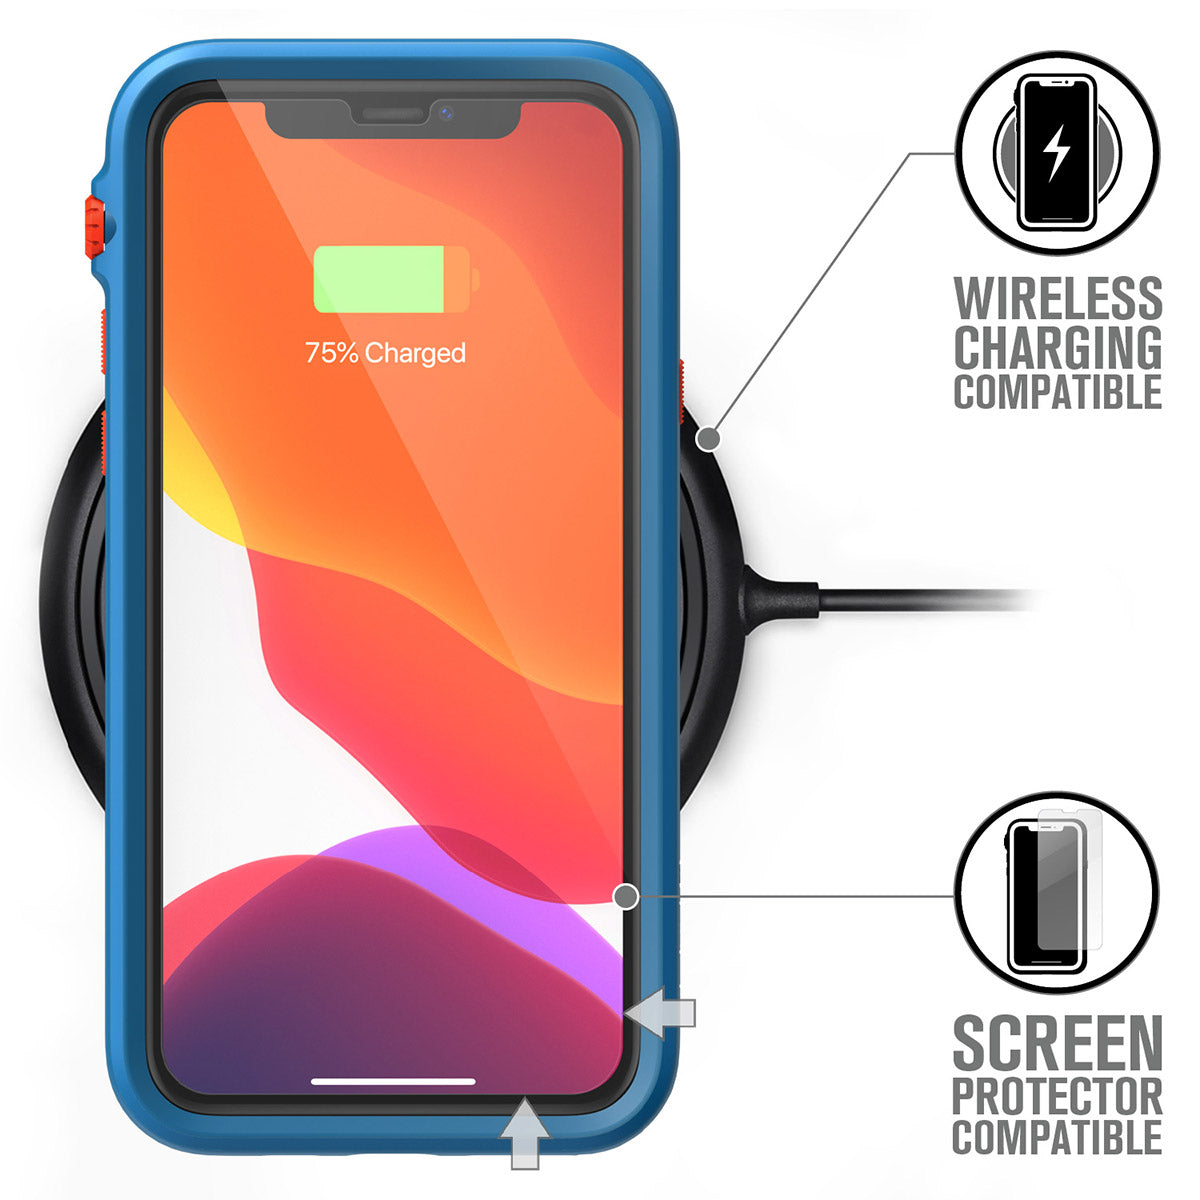 catalyst iPhone 11 series impact protection case for iphone 11 pro blueridge sunset placed on the wireless charger 75% charged text reads wireless charging compatible screen protector compatible